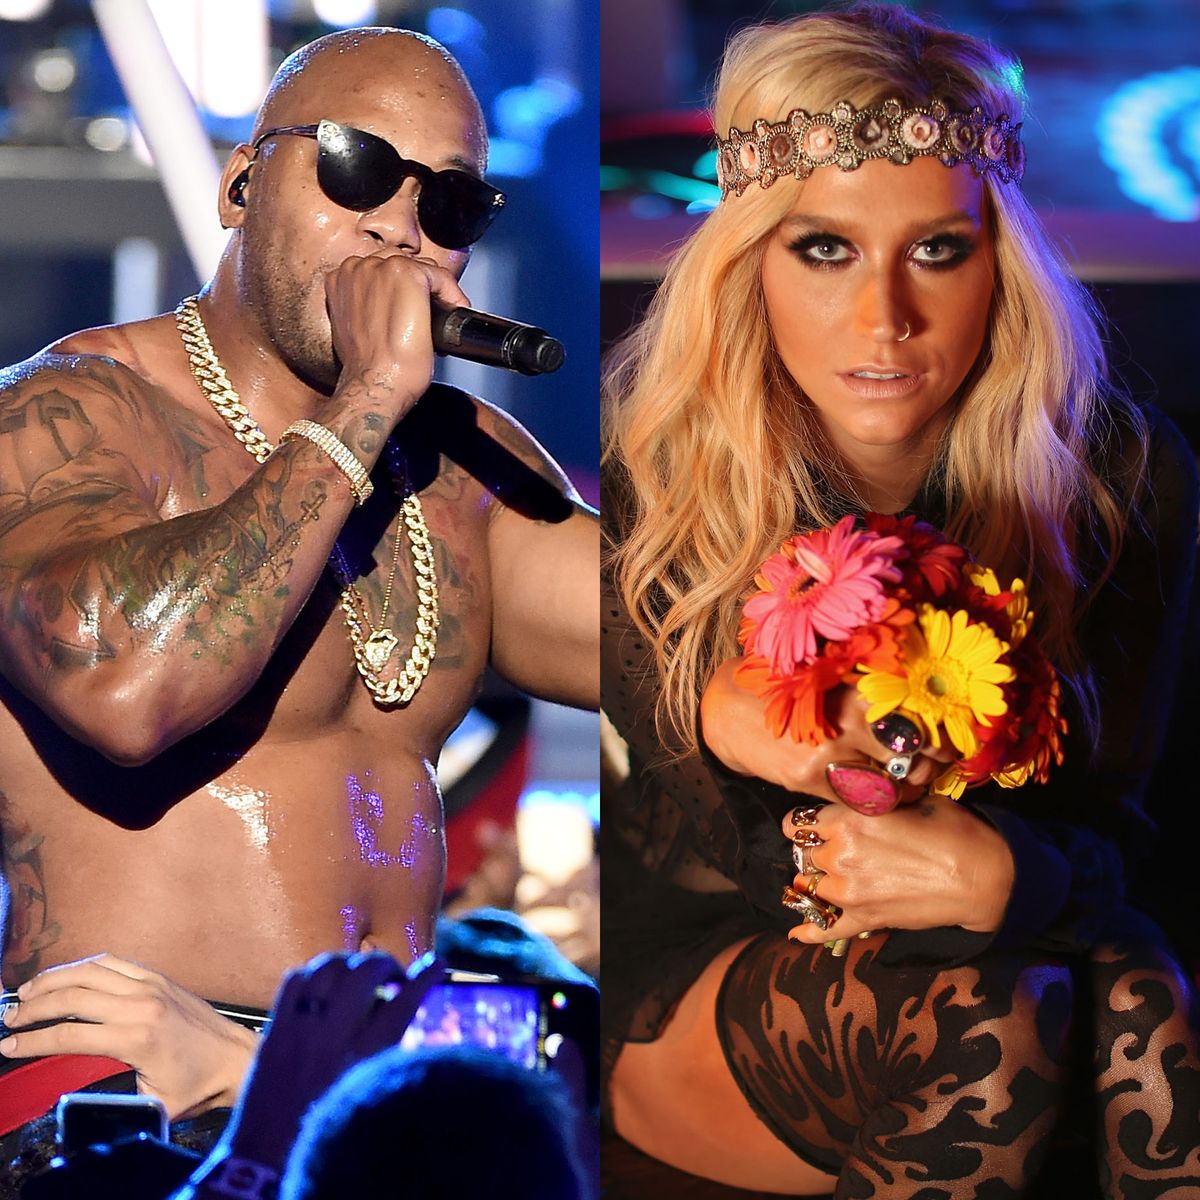 Flo Rida hasn't managed to reach out to Kesha during her legal